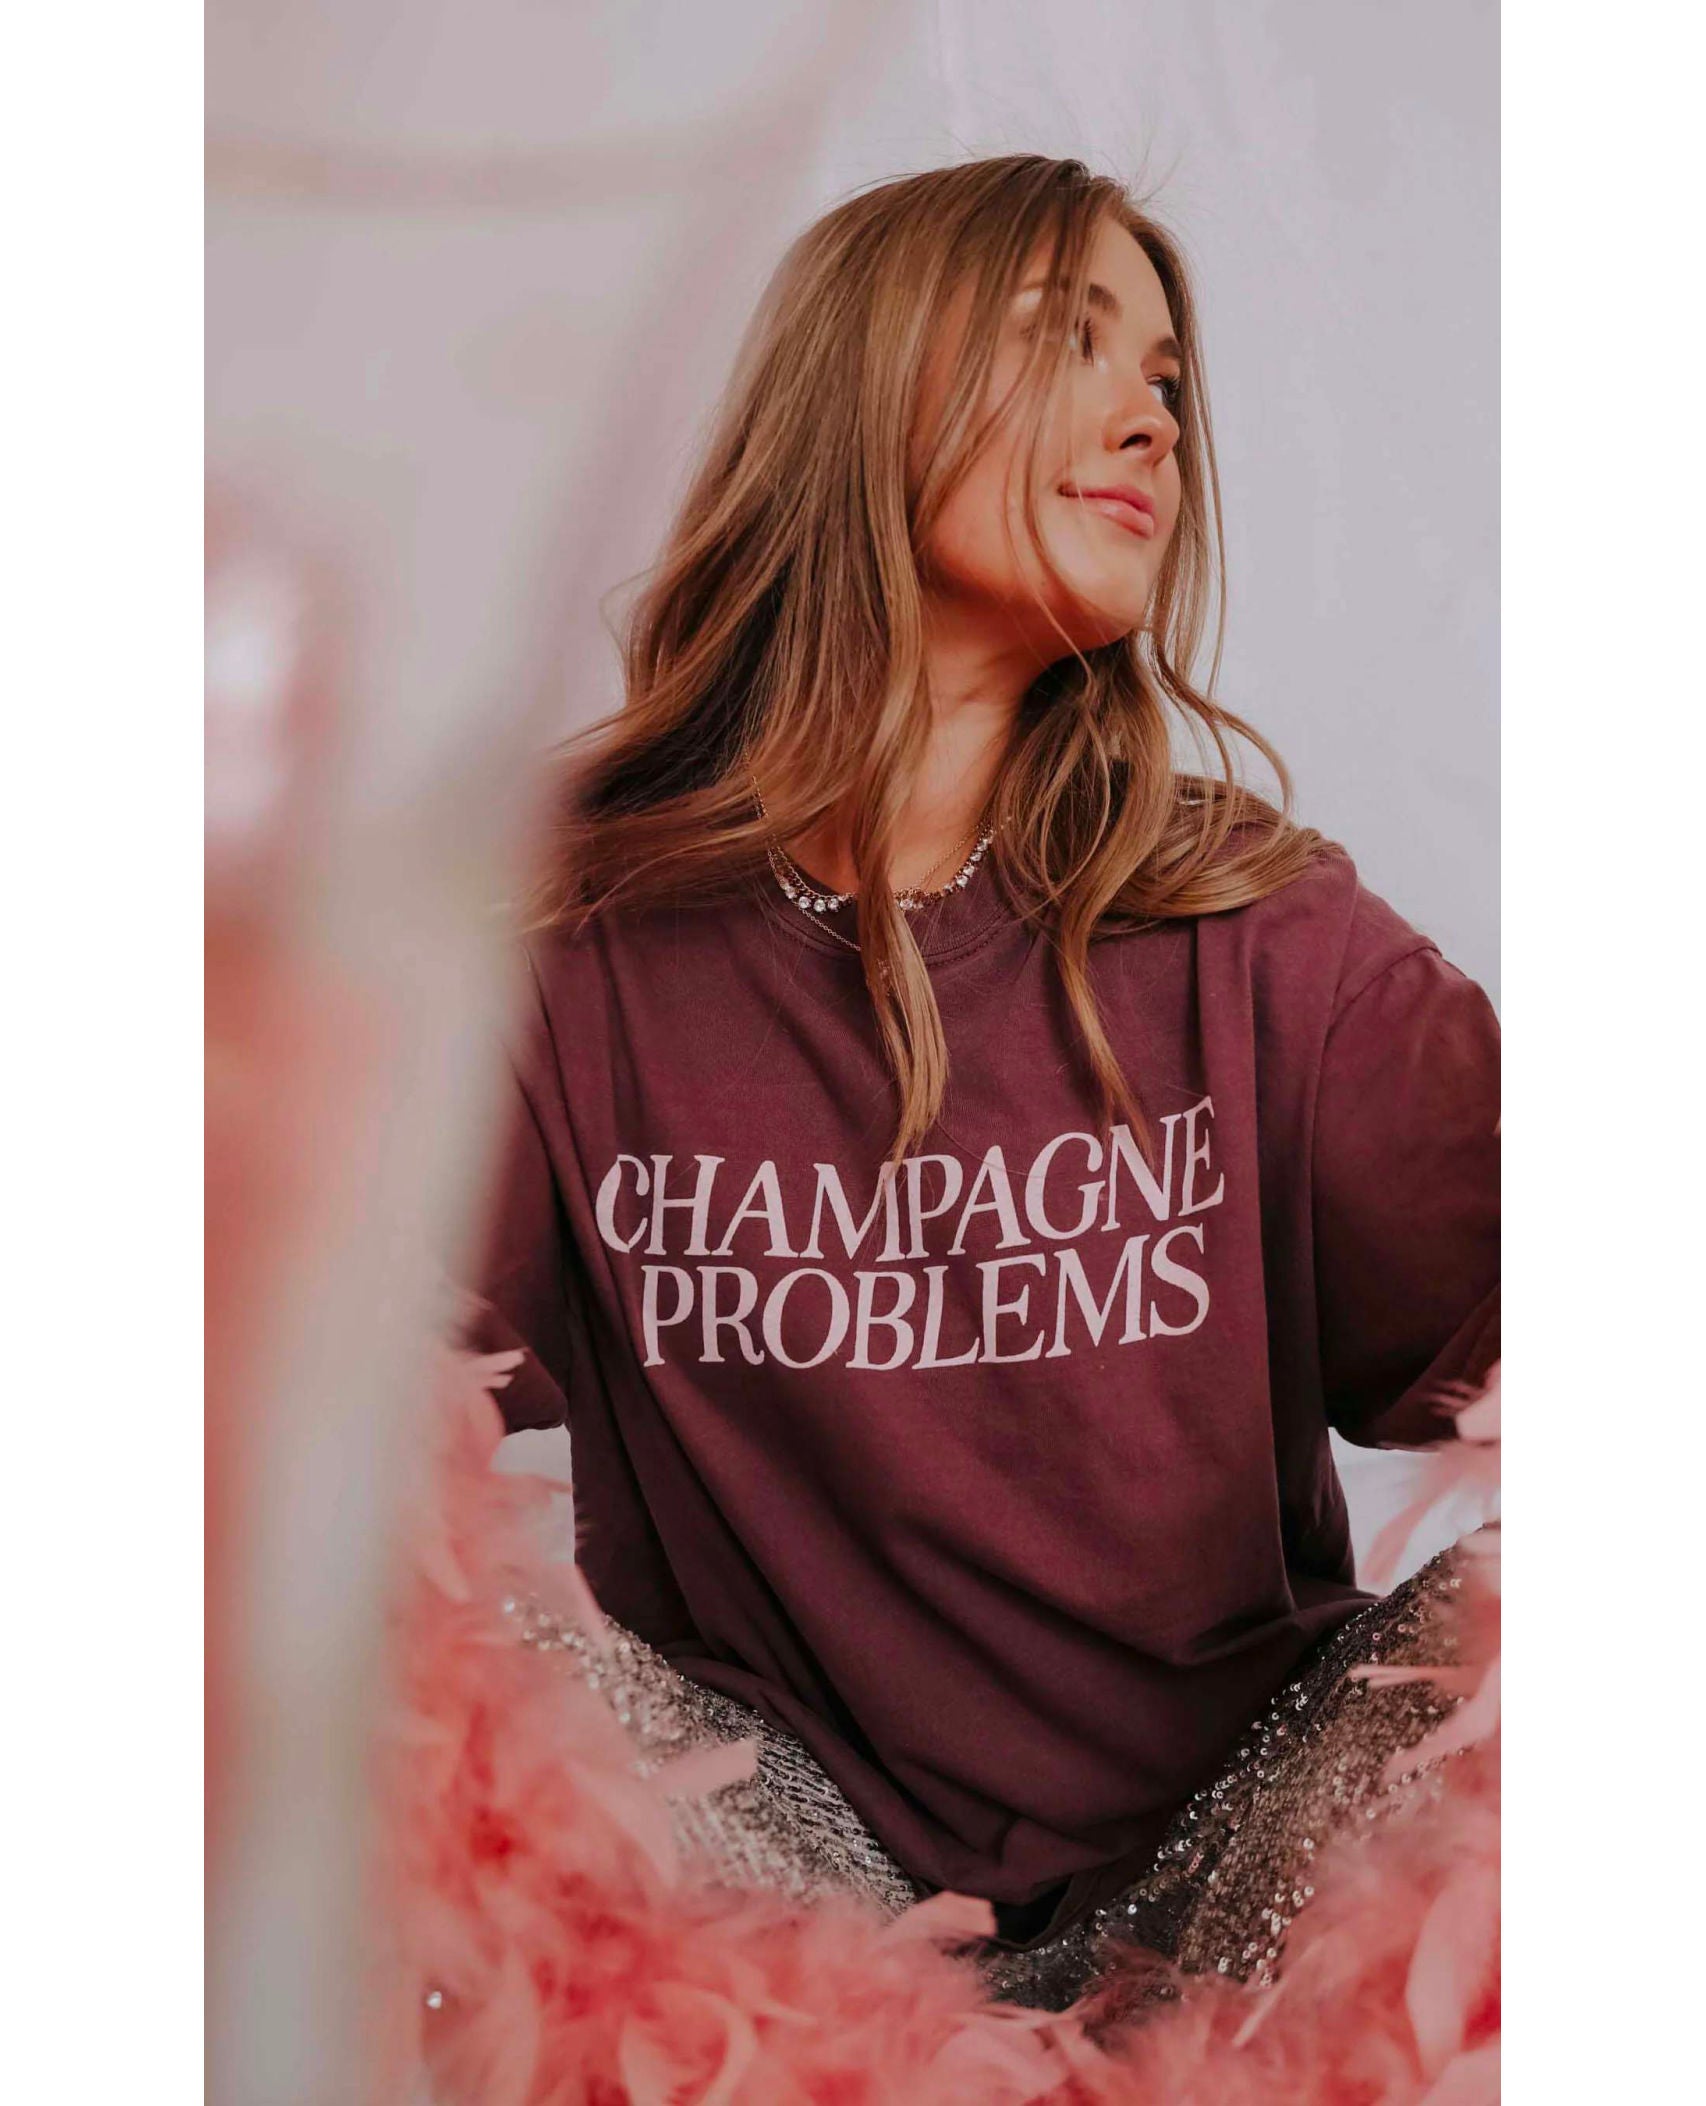 Champagne Problems Tee